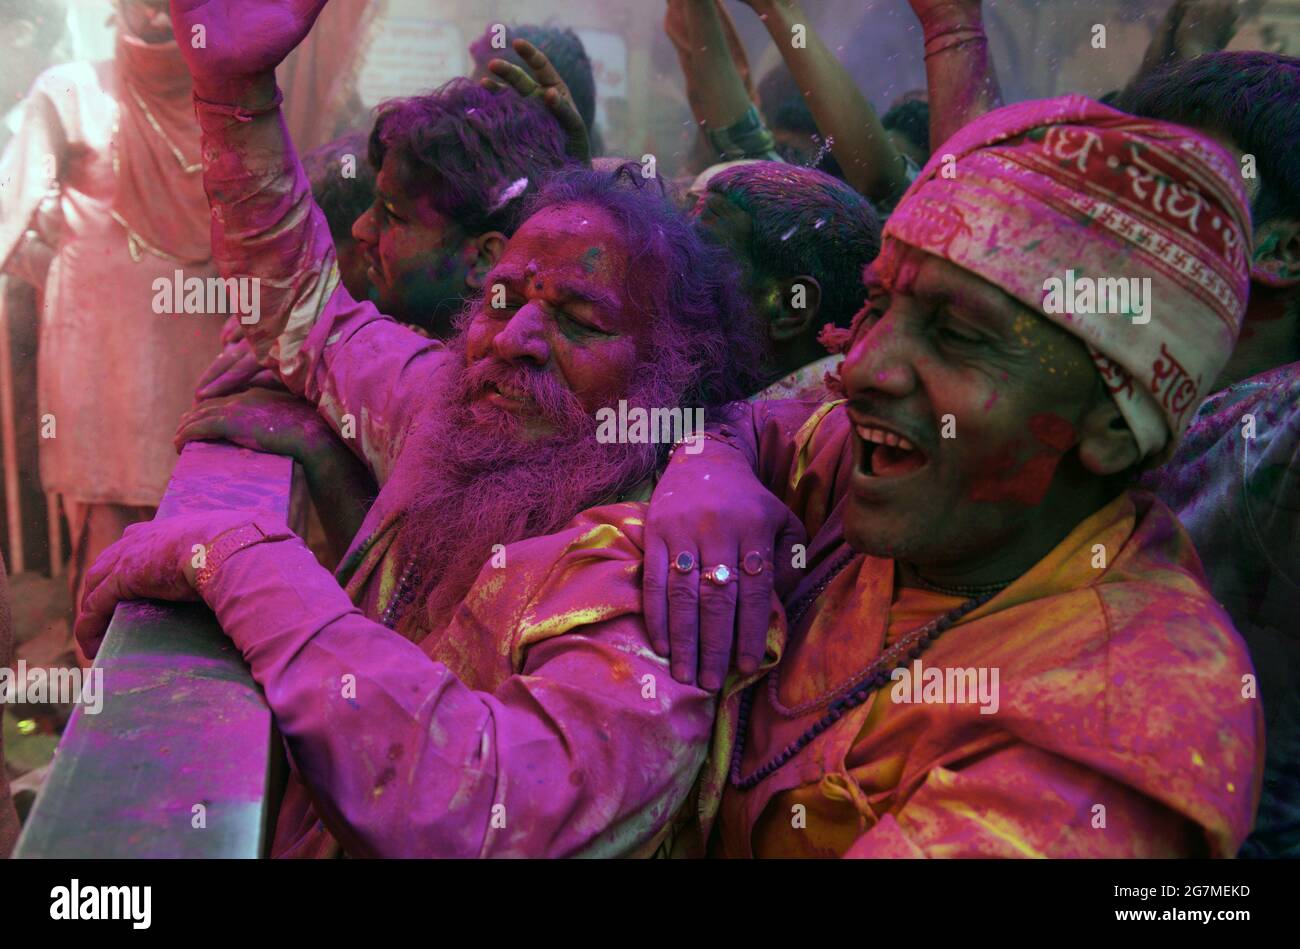 Revellers gather at the Shriji Temple (Laadli Sarkar Mahal), during Lathmar Holi, smeared with coloured powder. It is held during a full moon and the Stock Photo